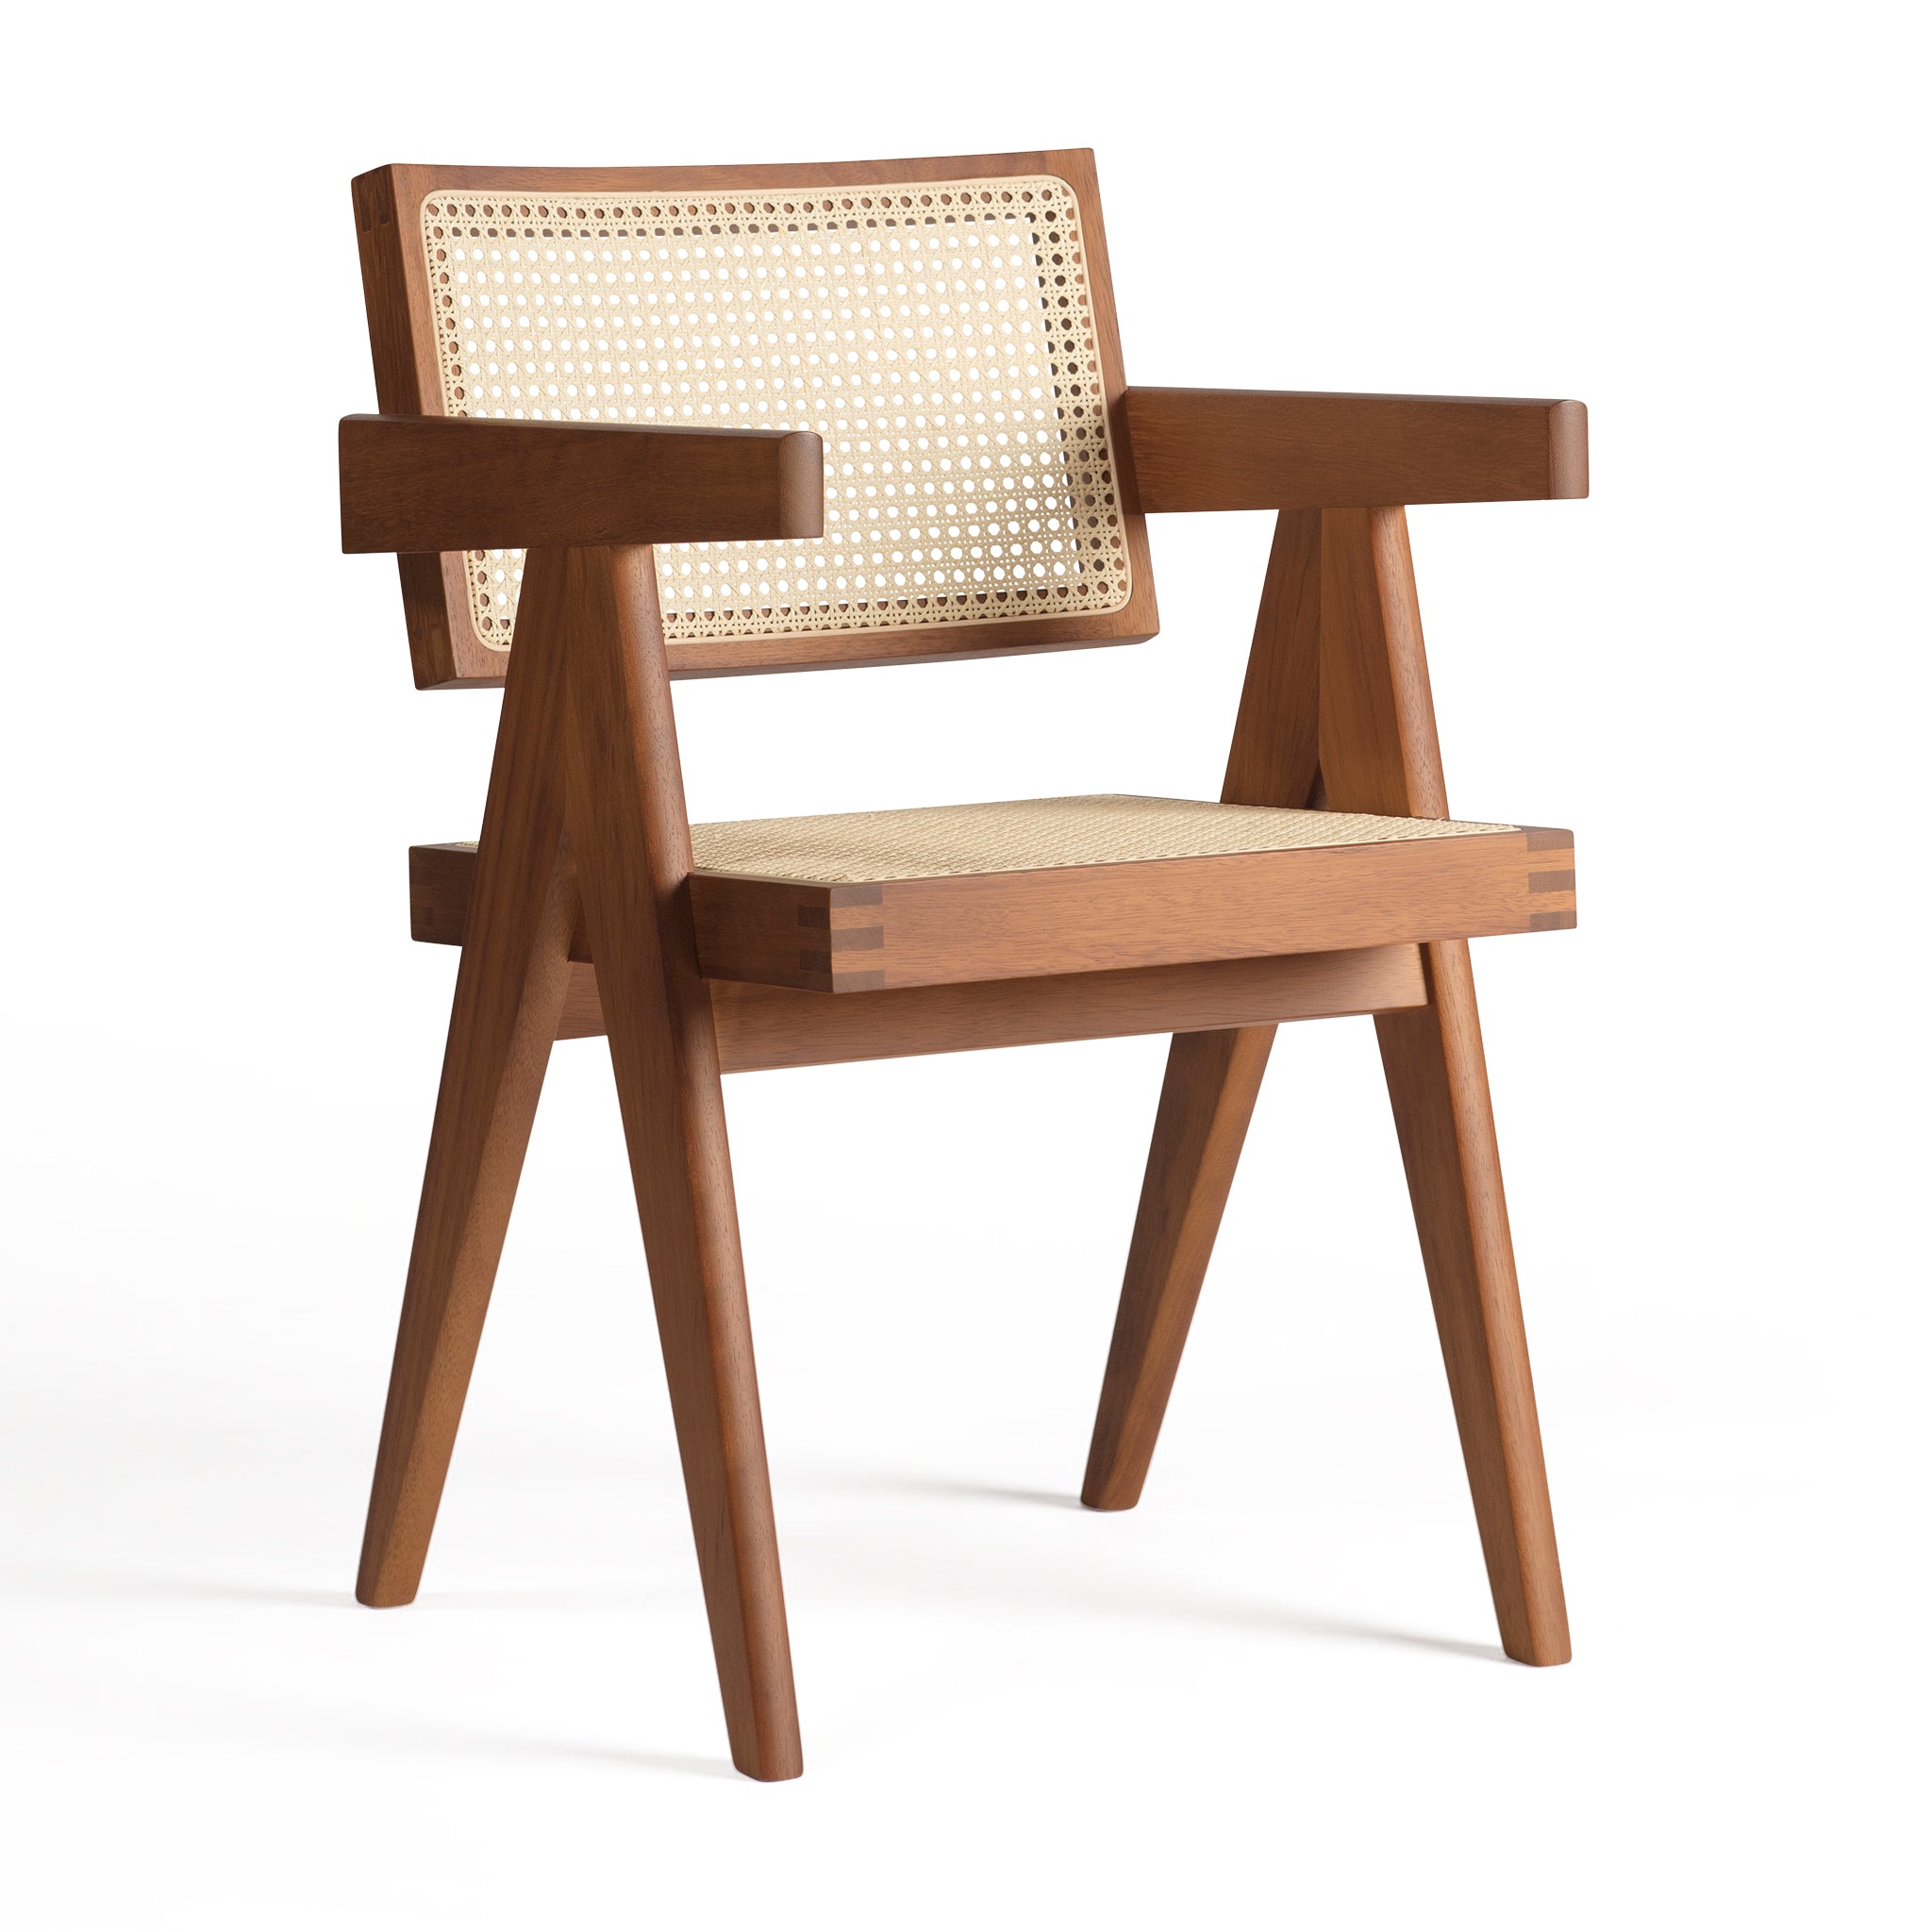 Main view of an authentic chandigarh armchair, pierre jeanneret era, teak frame, viennese cane, produced by Klarel #K34-1